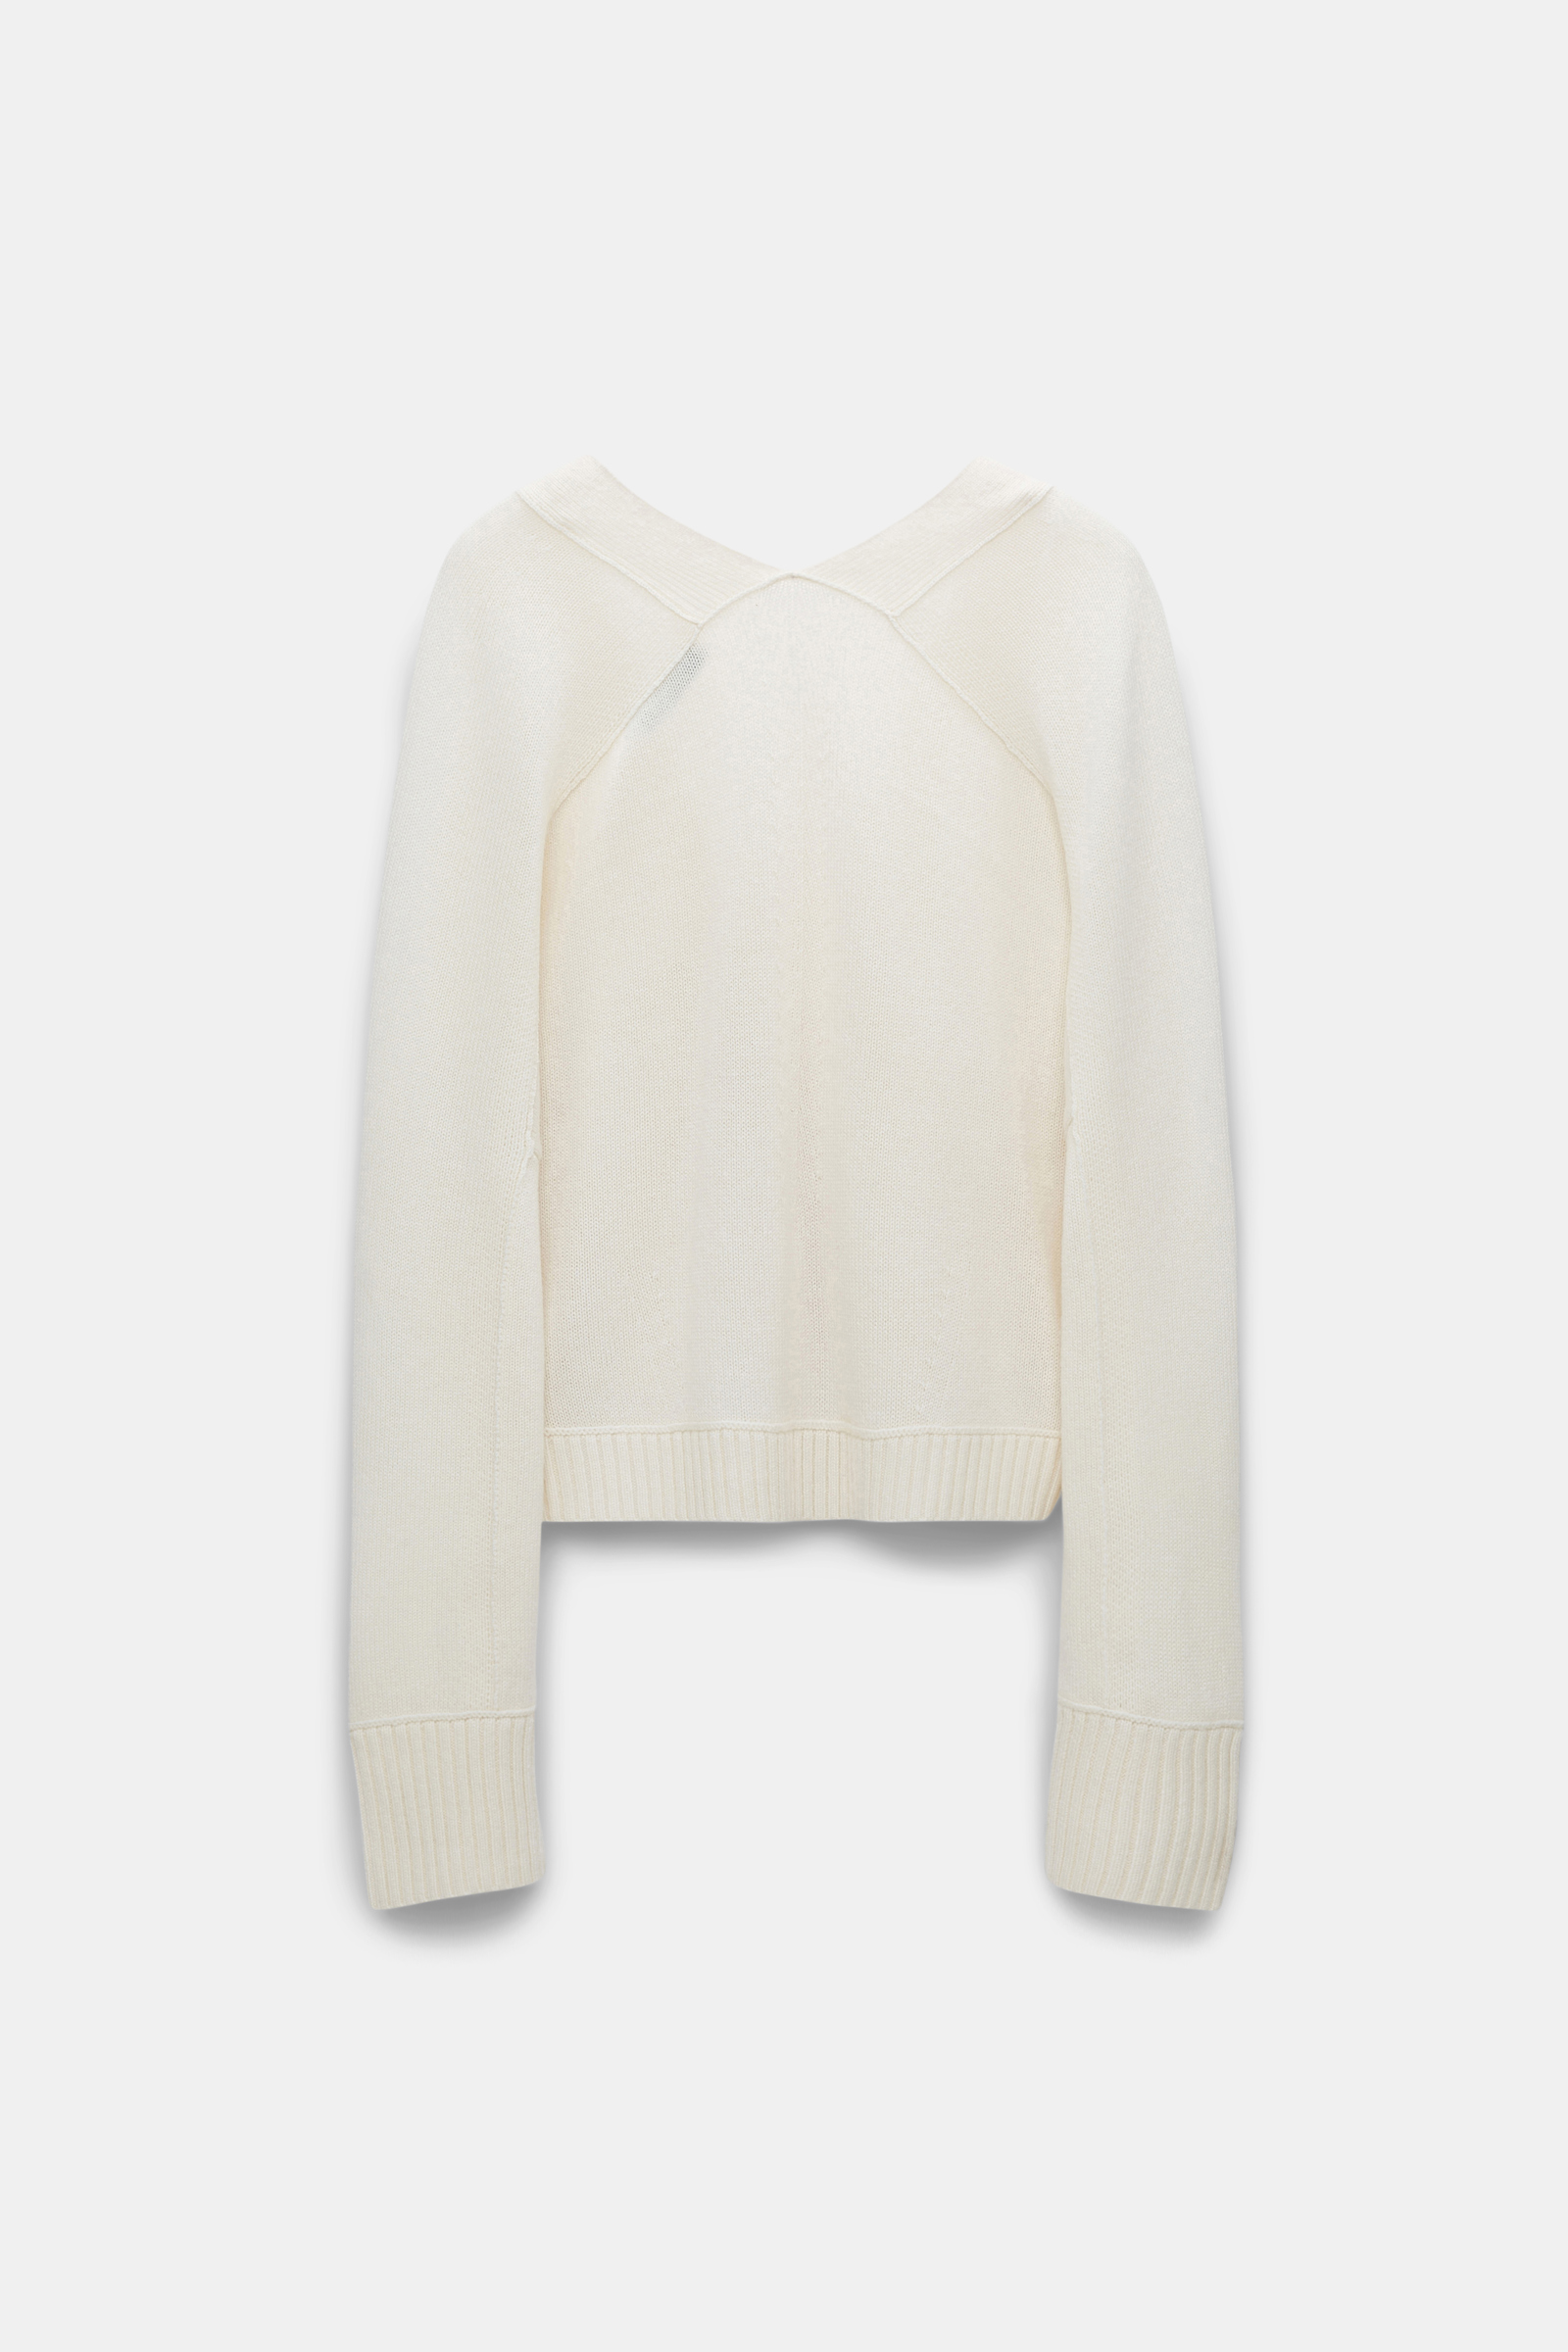 Dorothee Schumacher Wool-cashmere V-neck cardigan with pockets camellia white